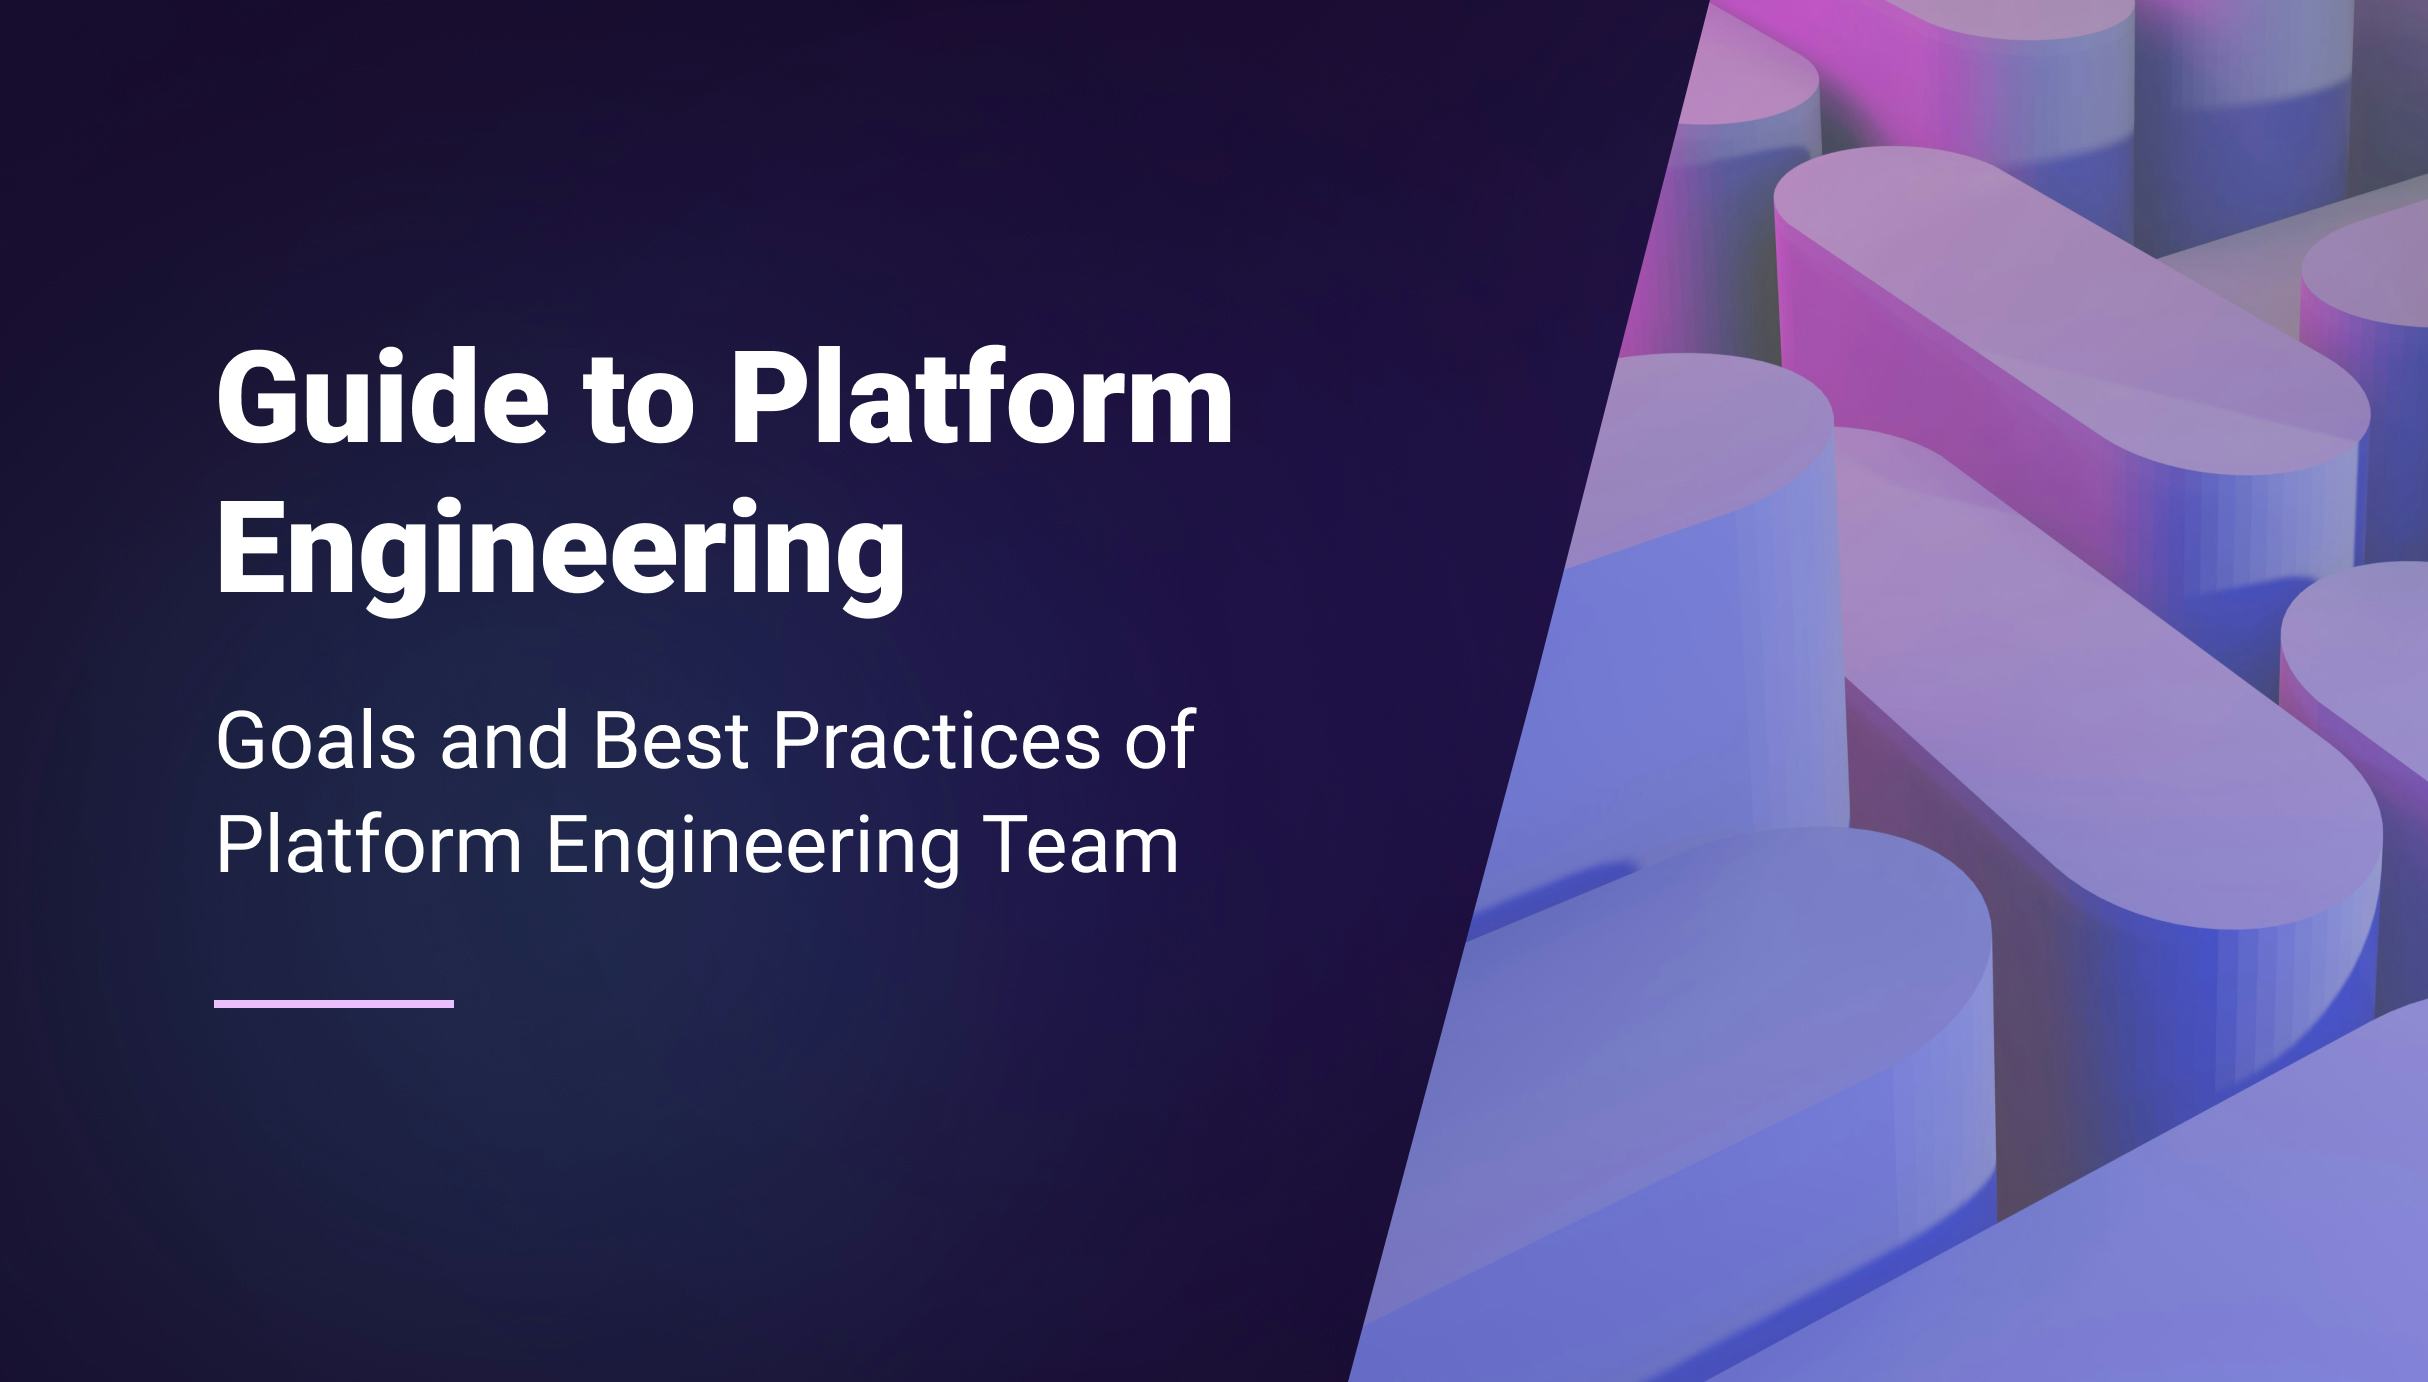 Guide to Platform Engineering: Goals and Best Practices of Platform Engineering Team